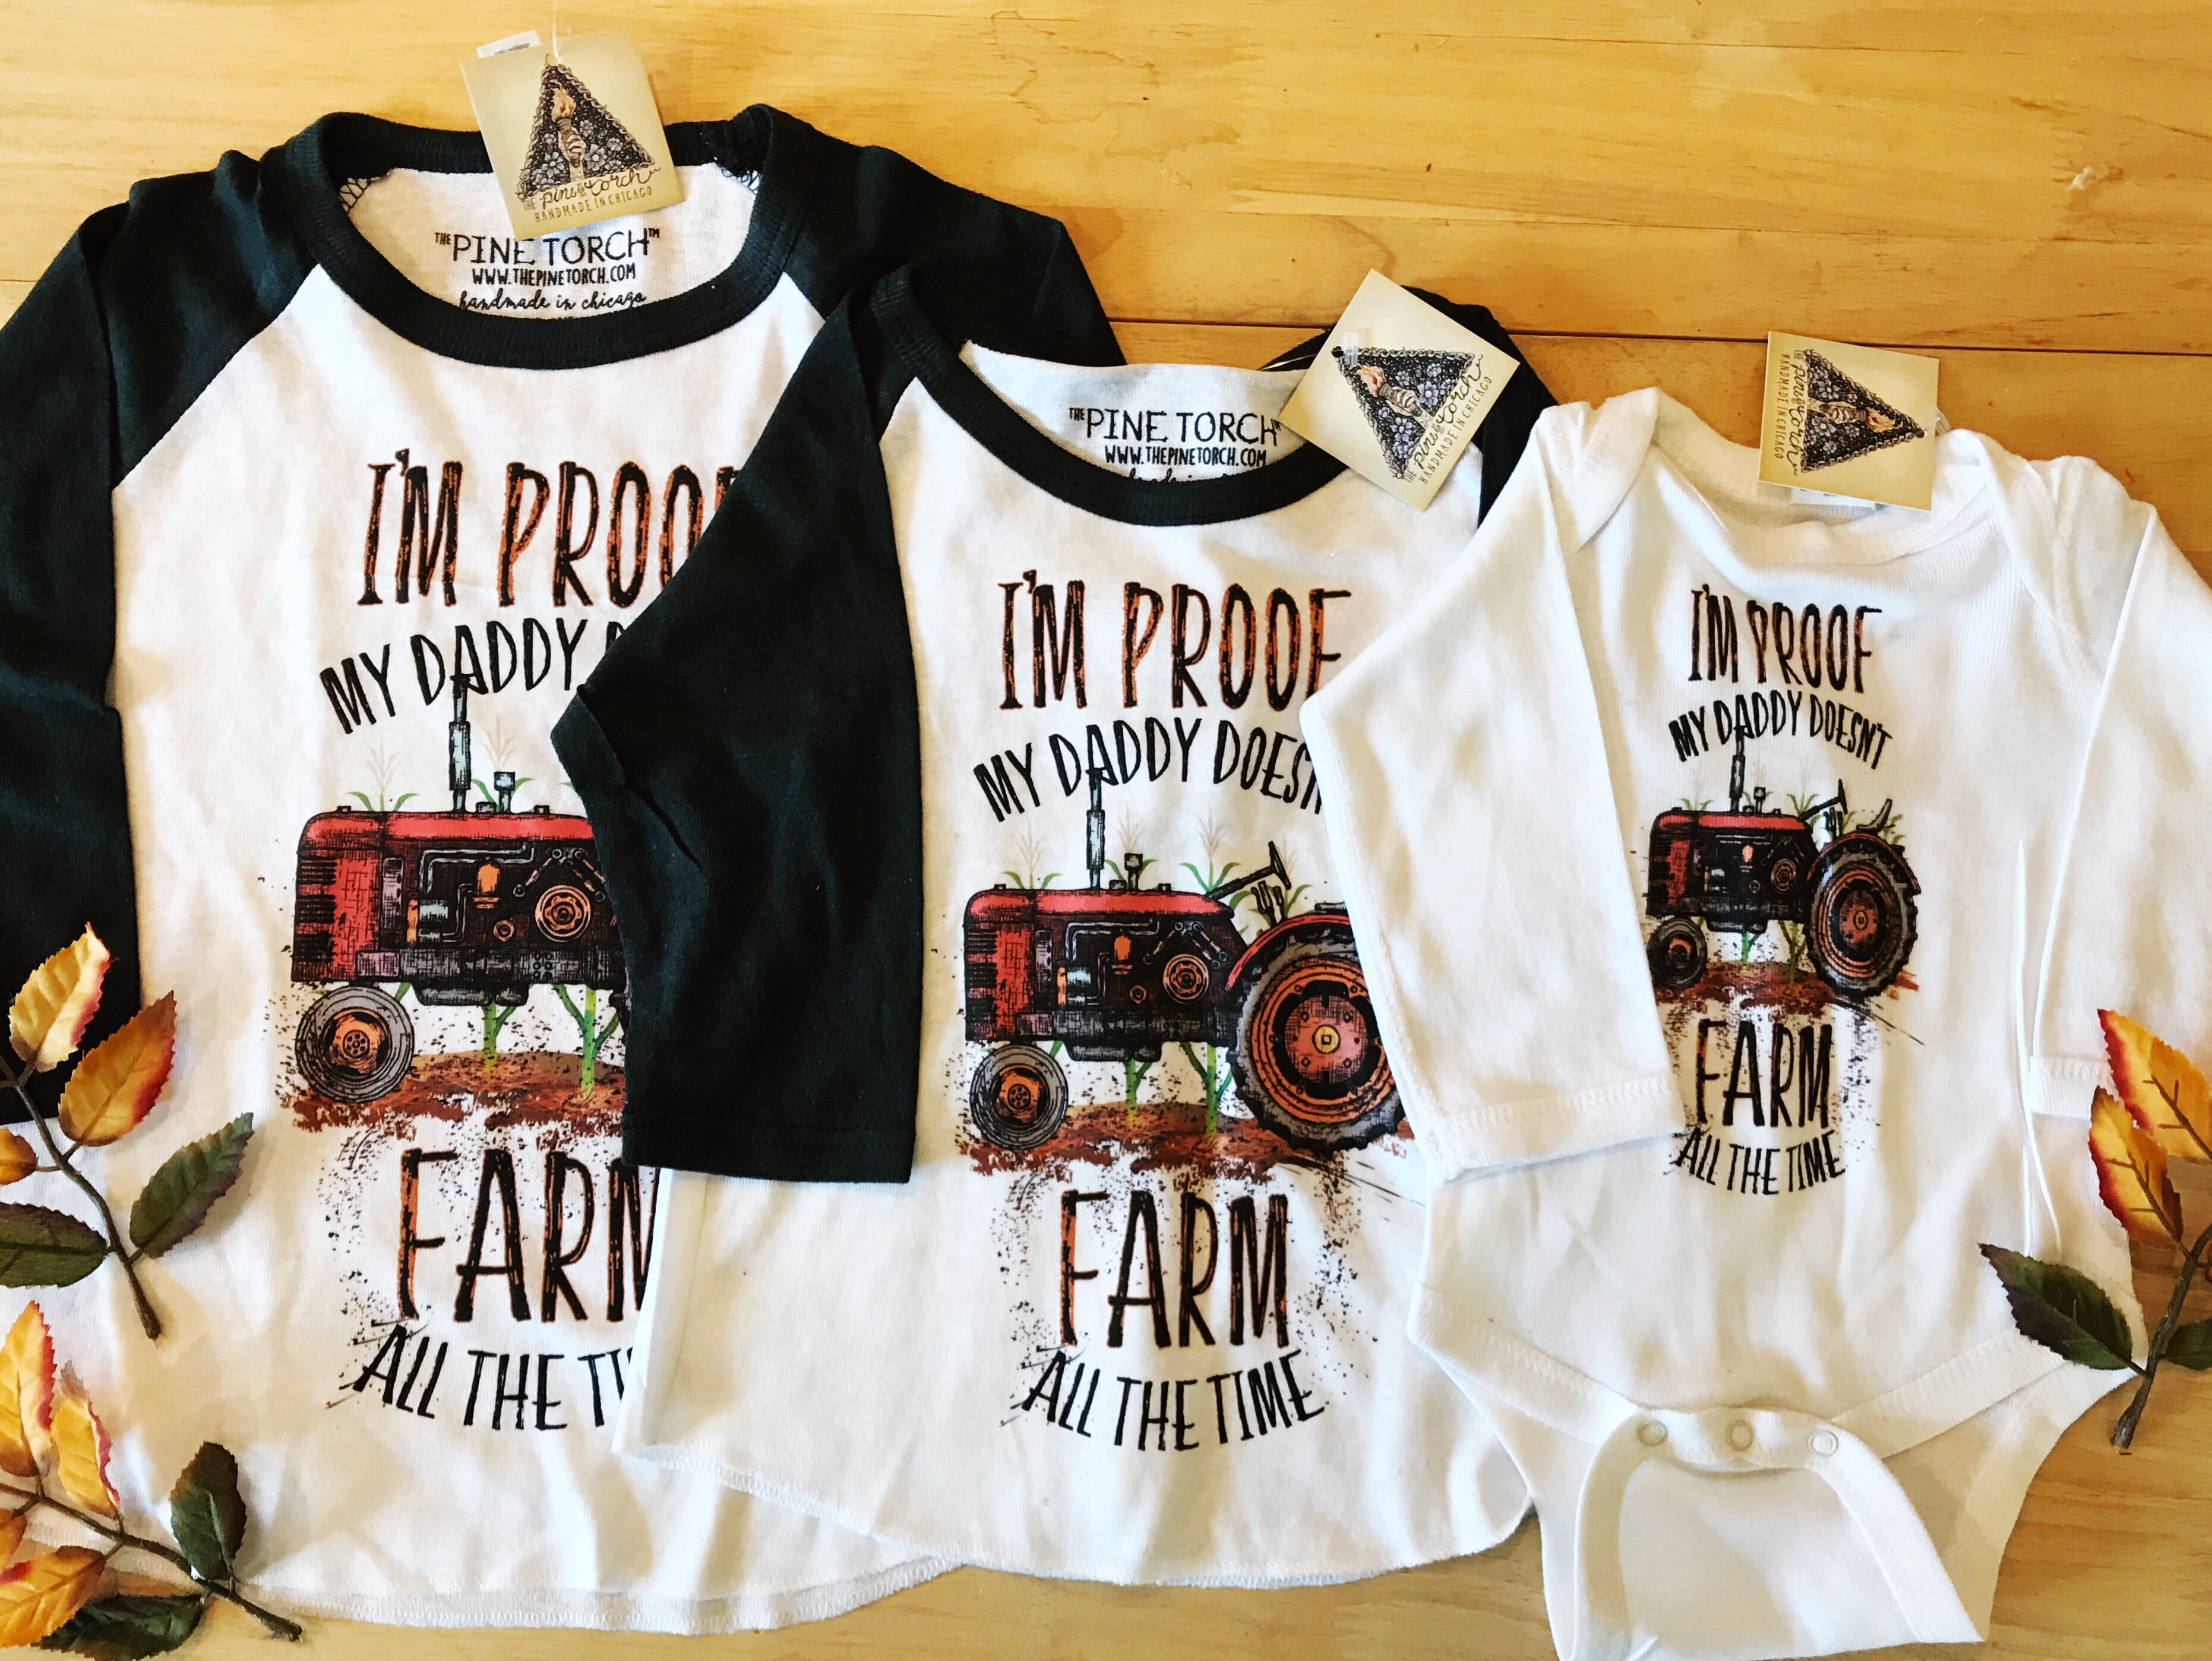 « I'M PROOF MY DADDY DOESN'T FARM ALL THE TIME » BODYSUIT